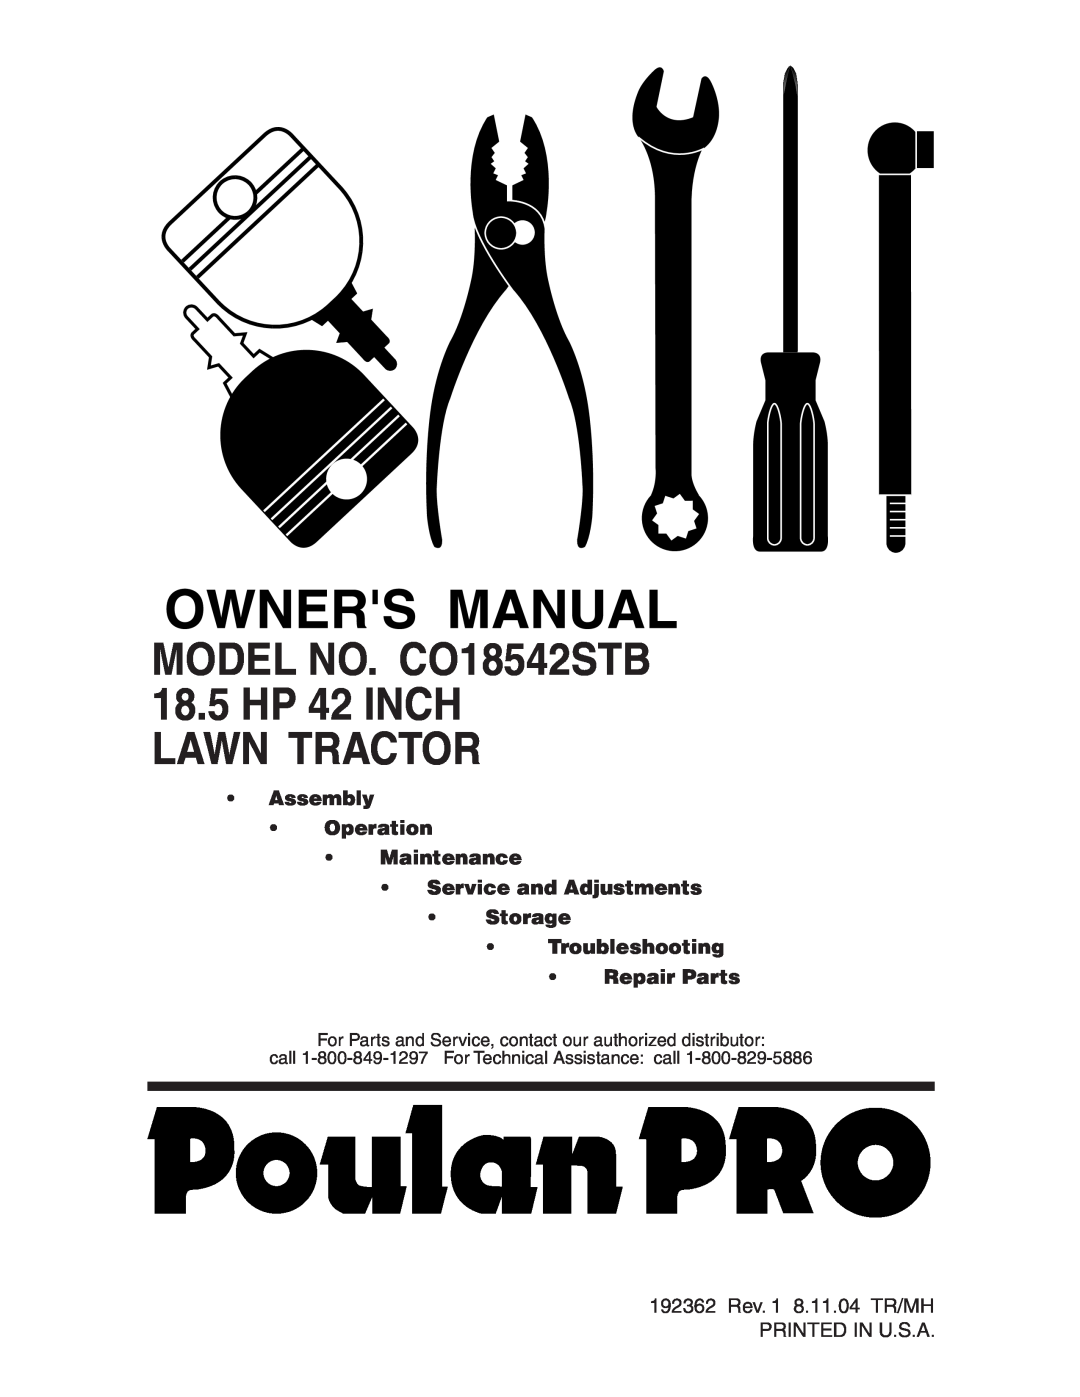 Poulan manual MODEL NO. CO18542STB, 18.5 HP 42 INCH LAWN TRACTOR, Troubleshooting Repair Parts 